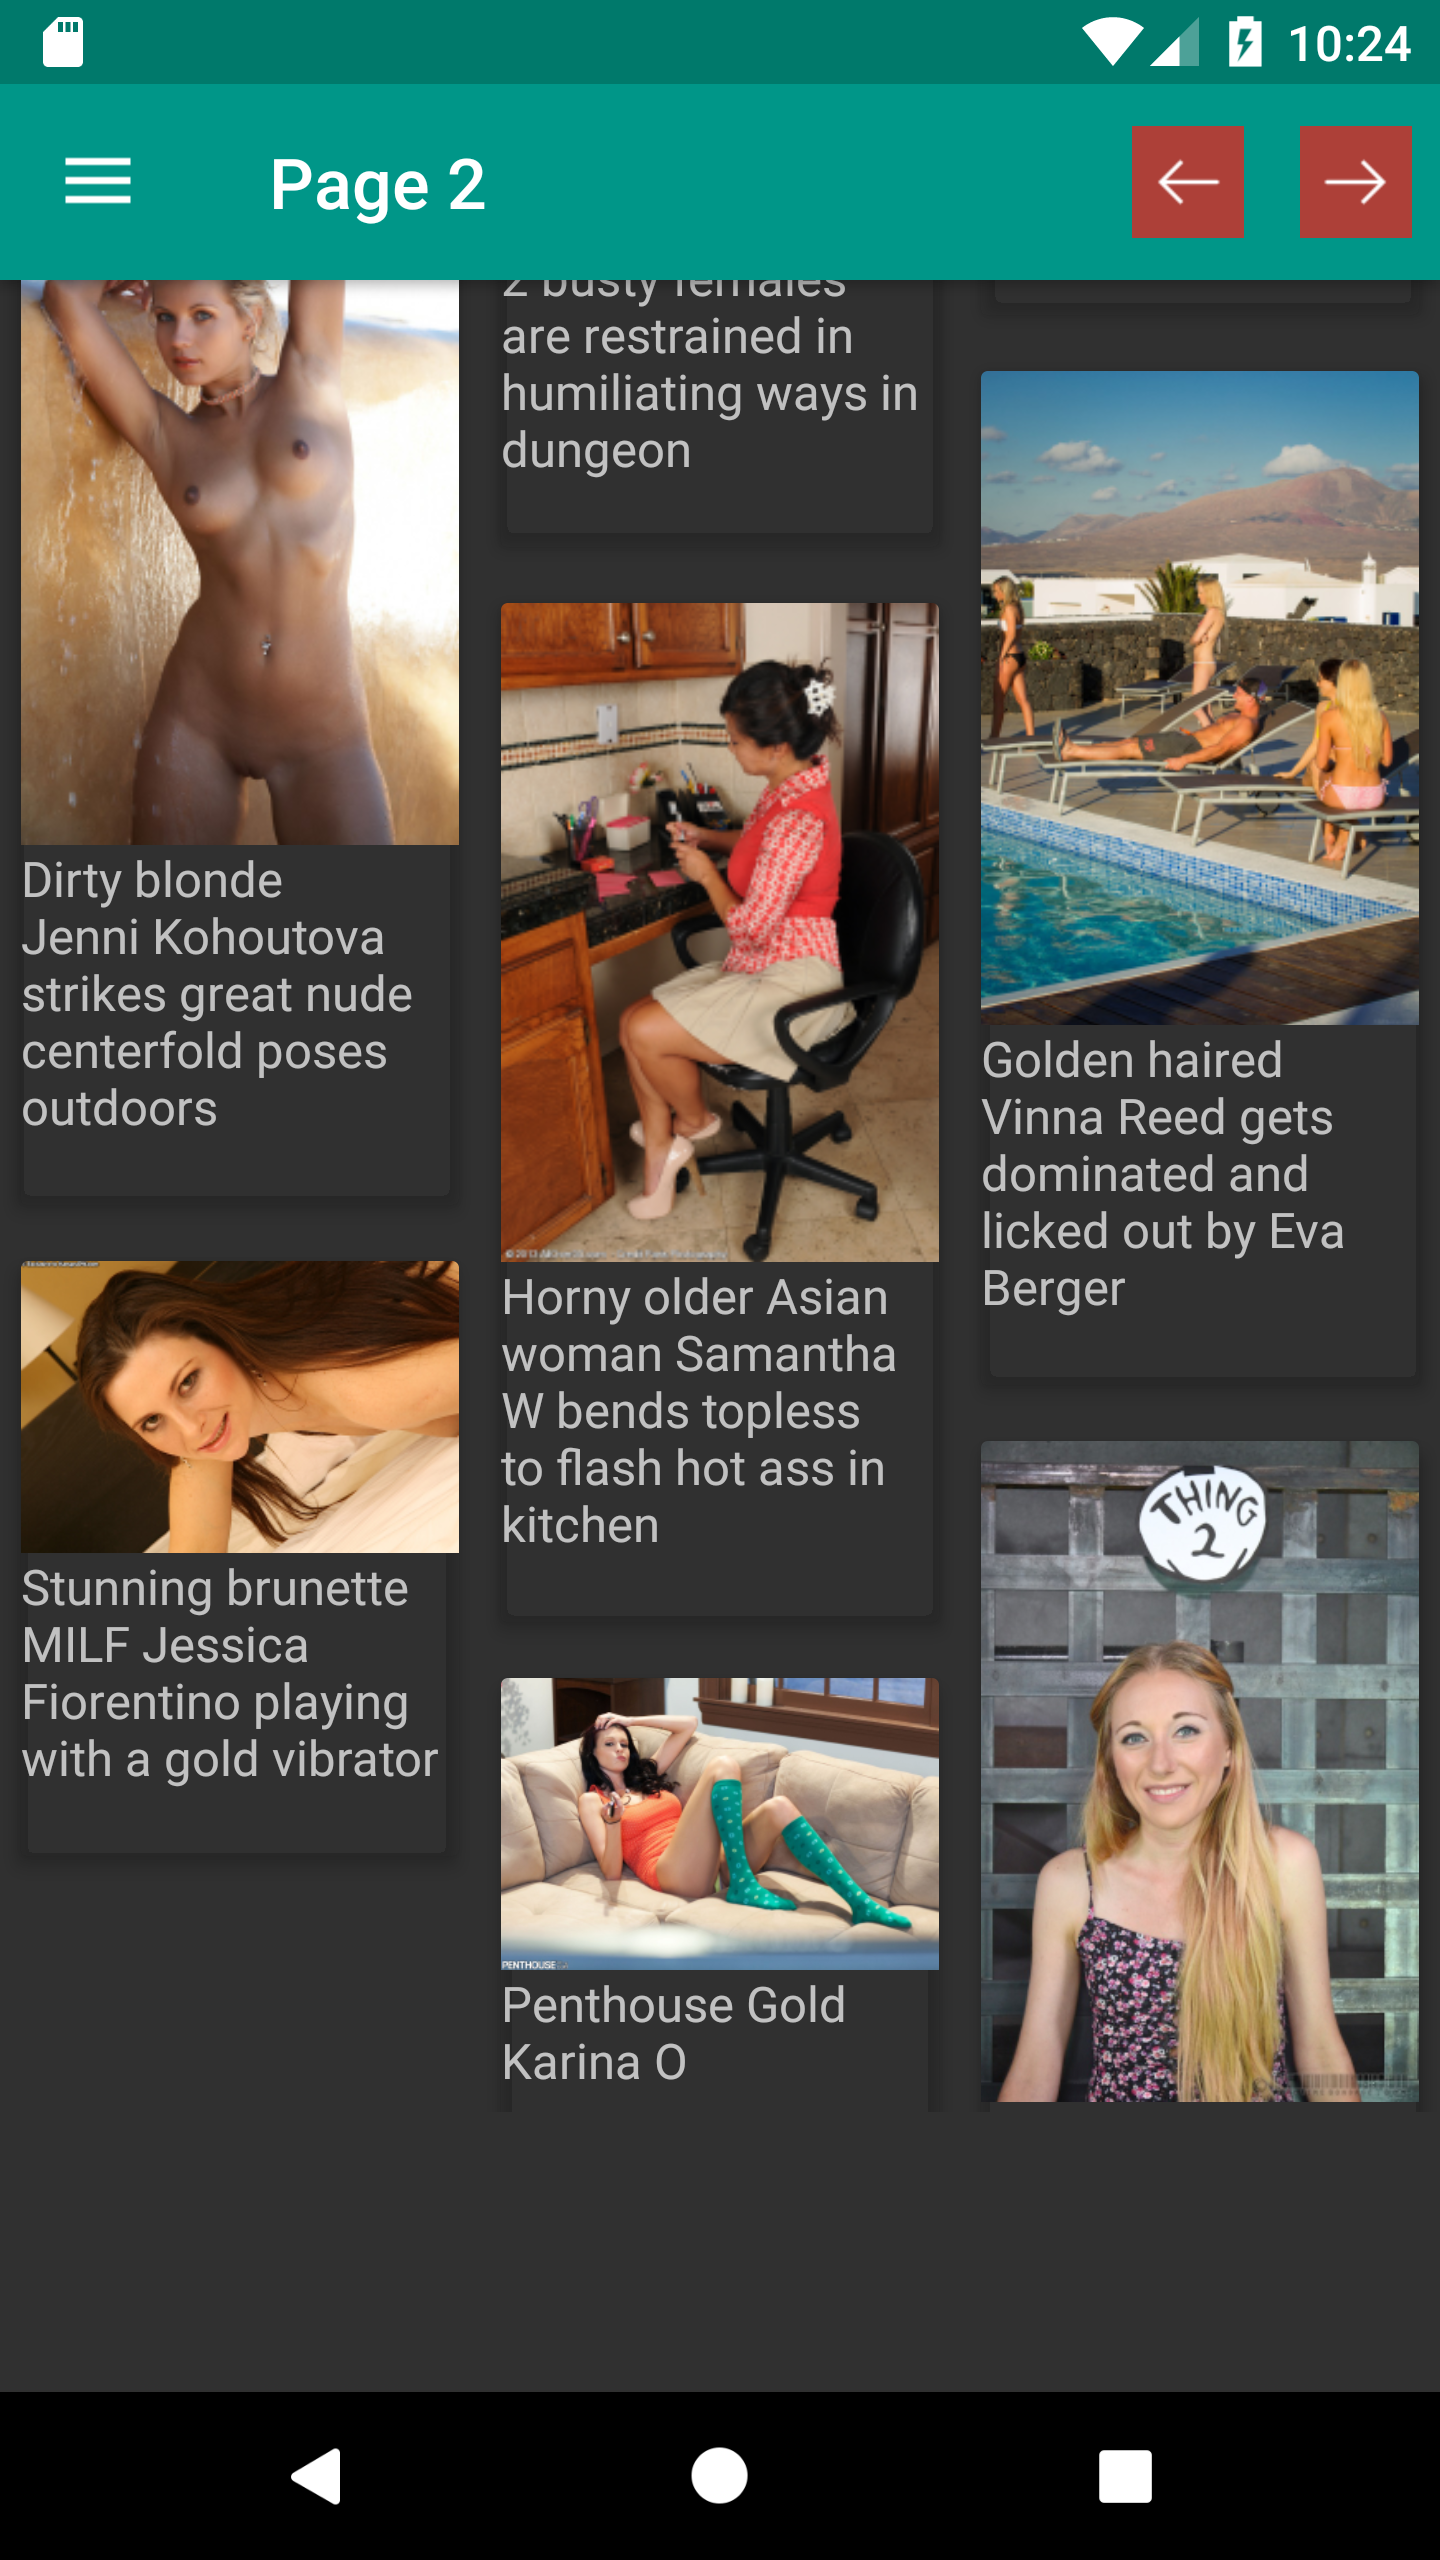 Old Young Porn hot,adult,download,apk,hentai,pic,pornstar,sexy,sissy,porn,pornstars,galleries,photos,images,best,android,pict,pics,app,apps,puzzle